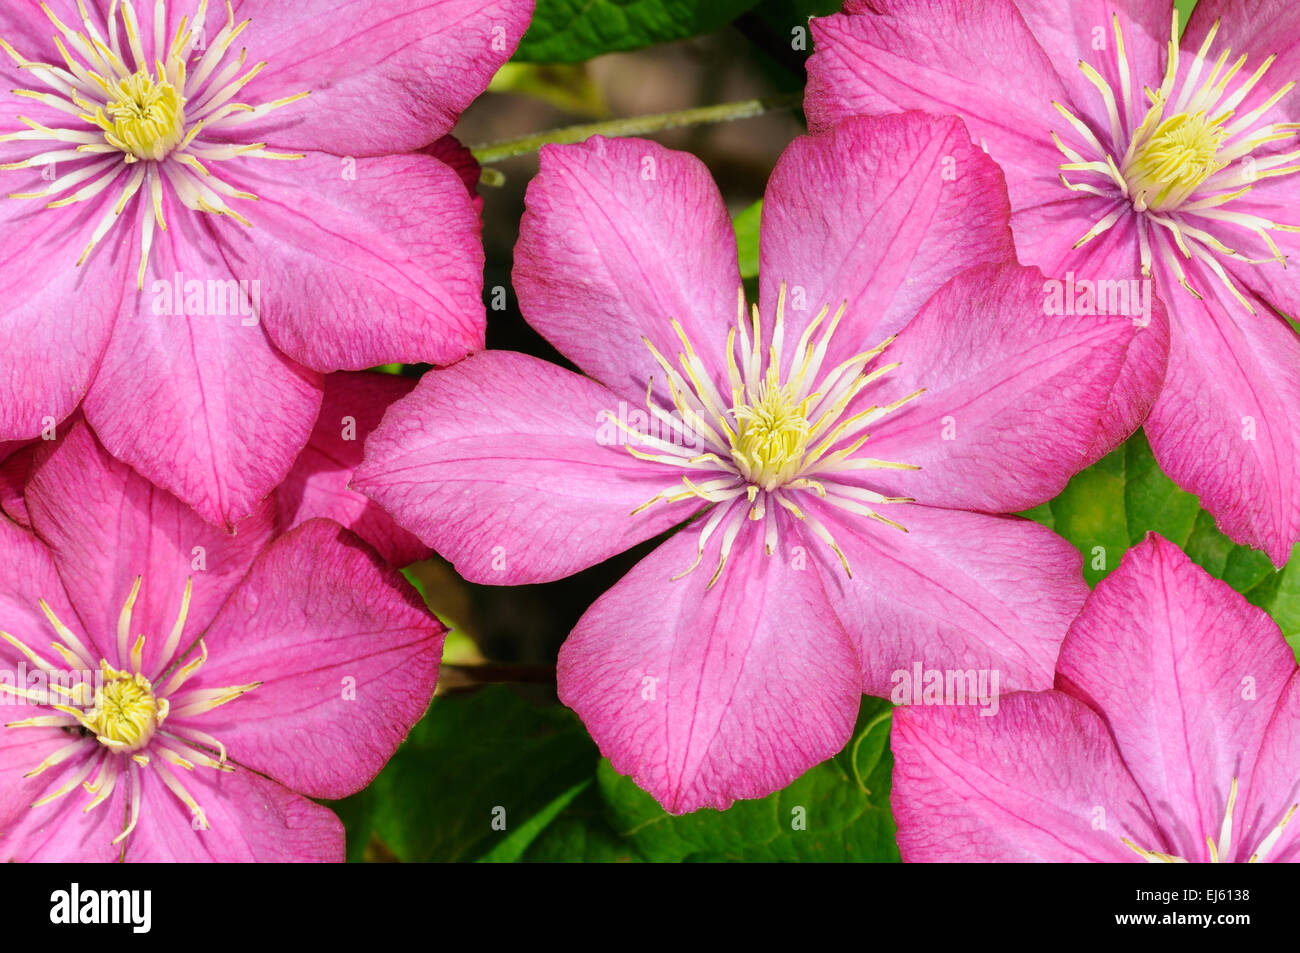 Small group of beautiful pink flowers (clematis) Stock Photo